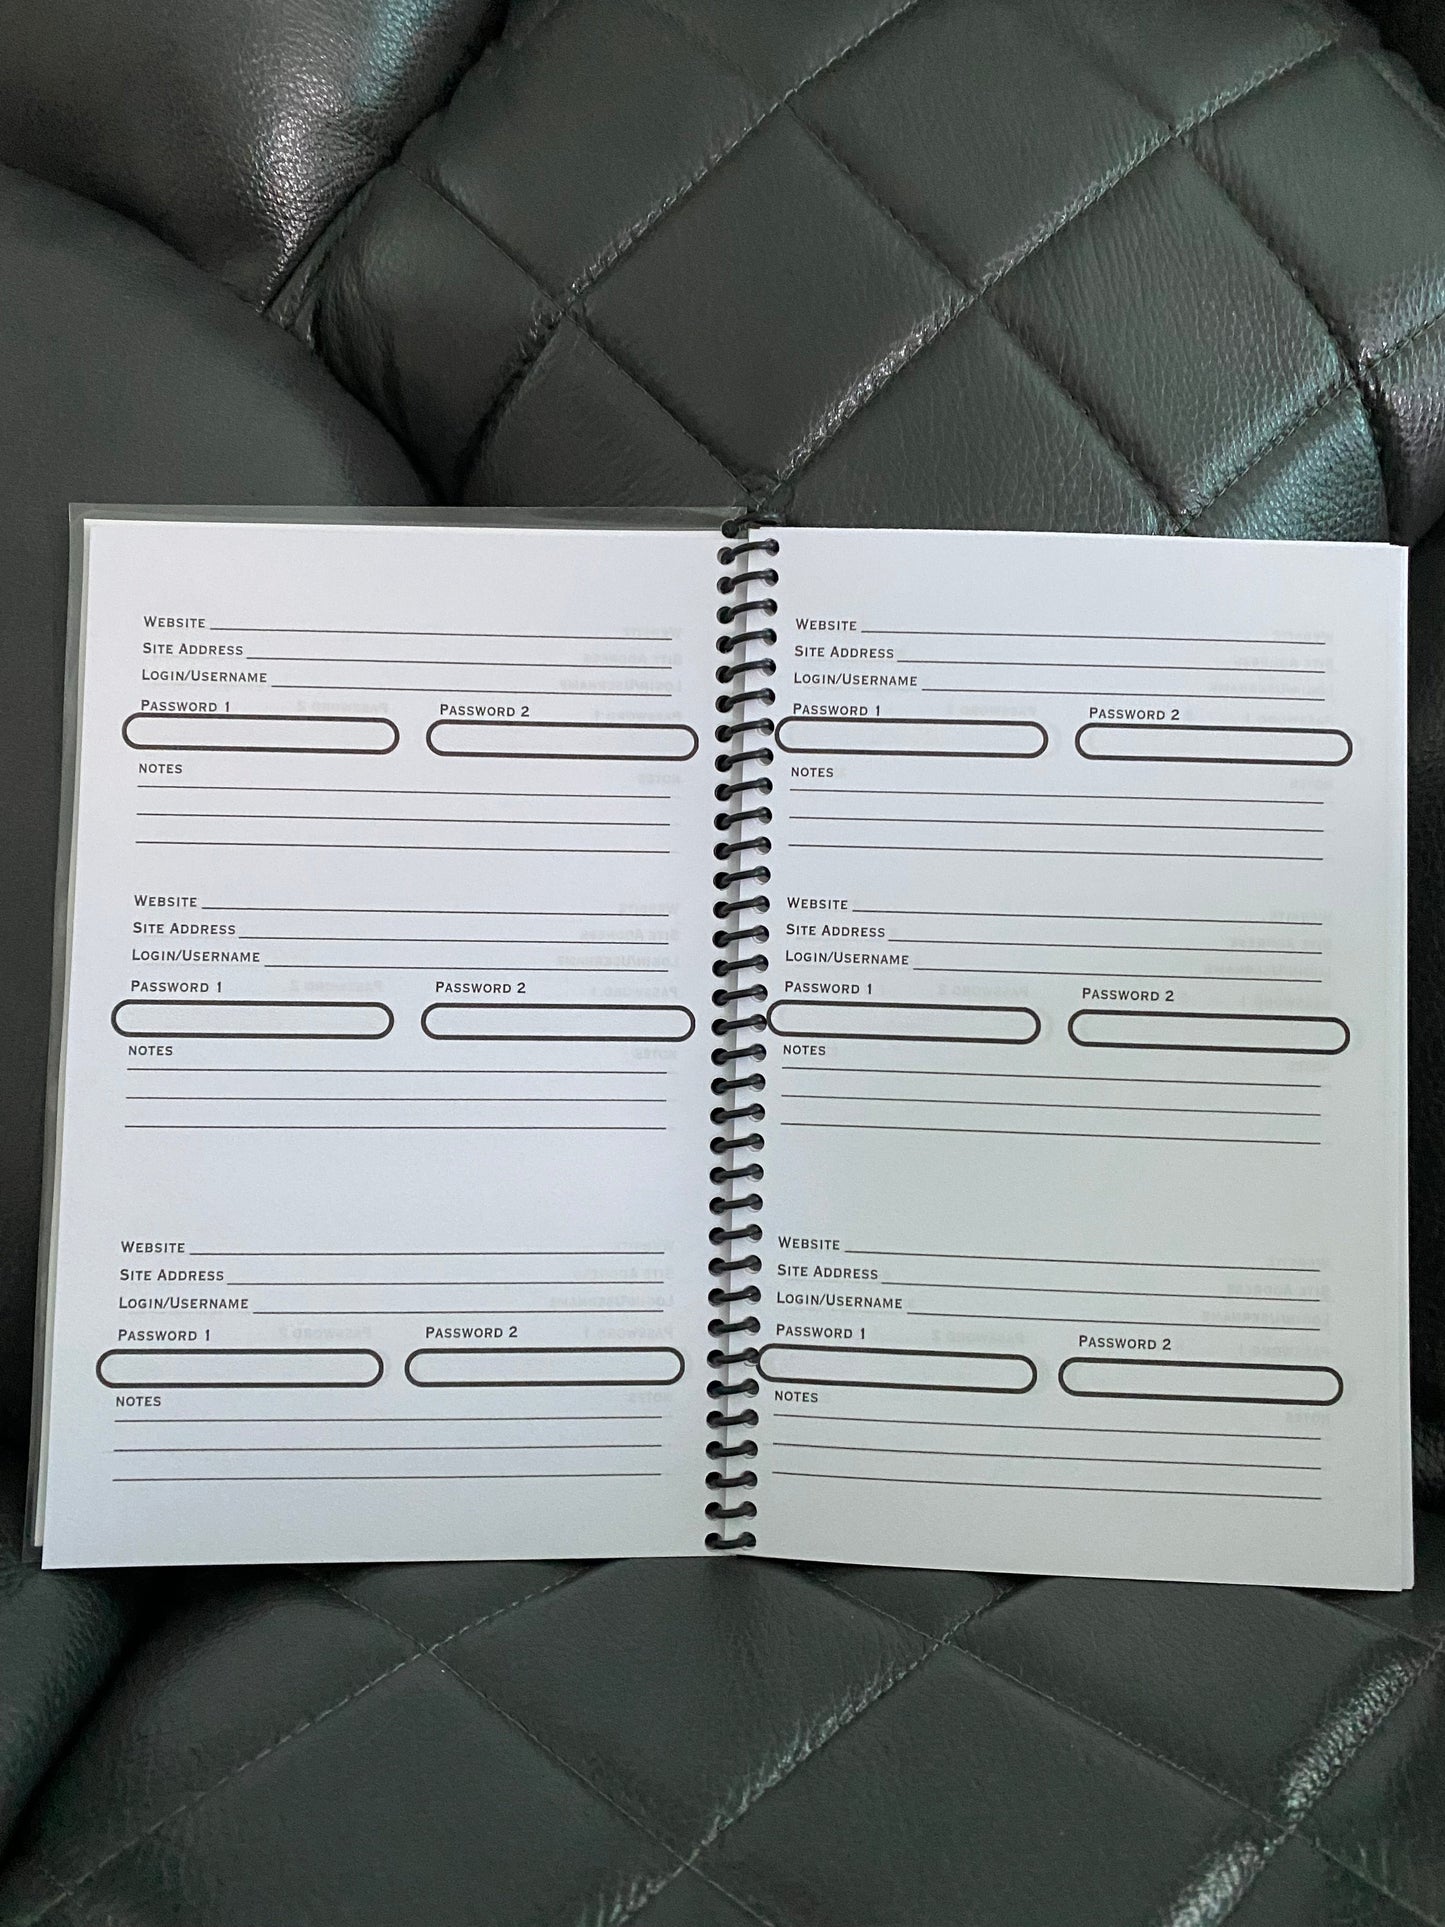 Username and Password Notebook (Color Cover 2)